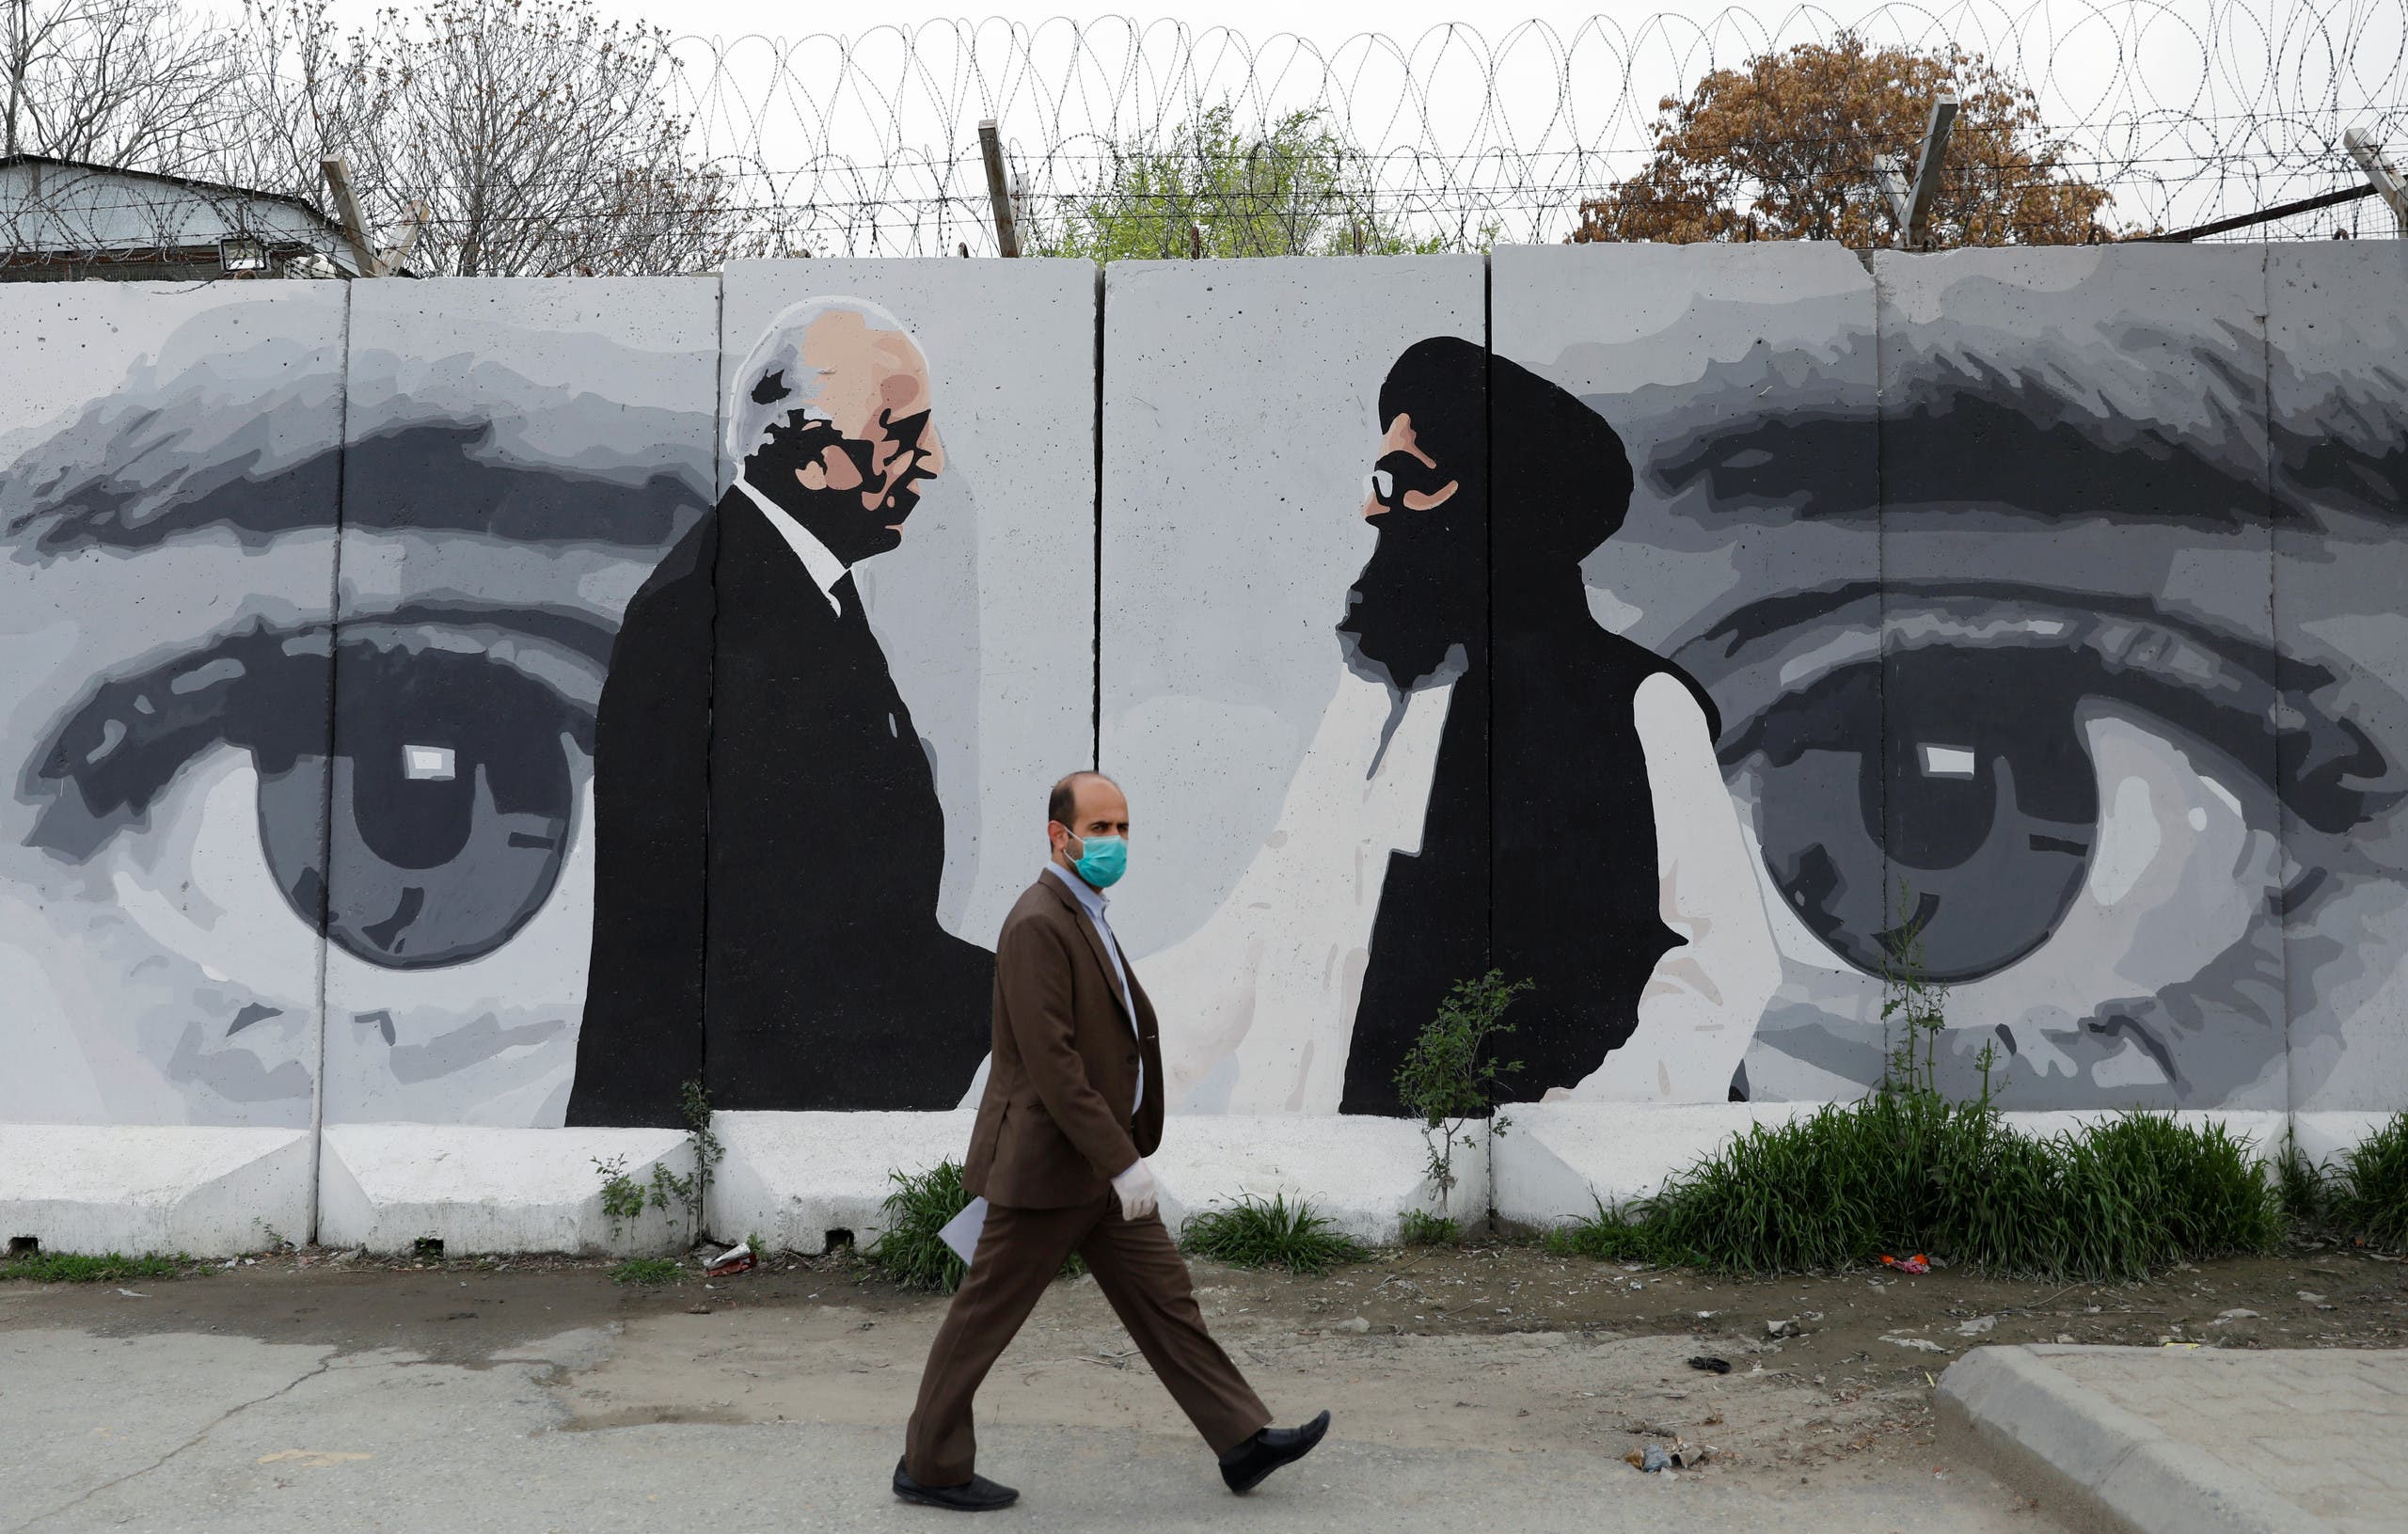 An Afghan man walks past a wall painted with photo of Zalmay Khalilzad, US envoy for peace in Afghanistan, and Mullah Abdul Ghani Baradar, the leader of the Taliban delegation, in Kabul, Afghanistan on April 13, 2020. (Reuters)